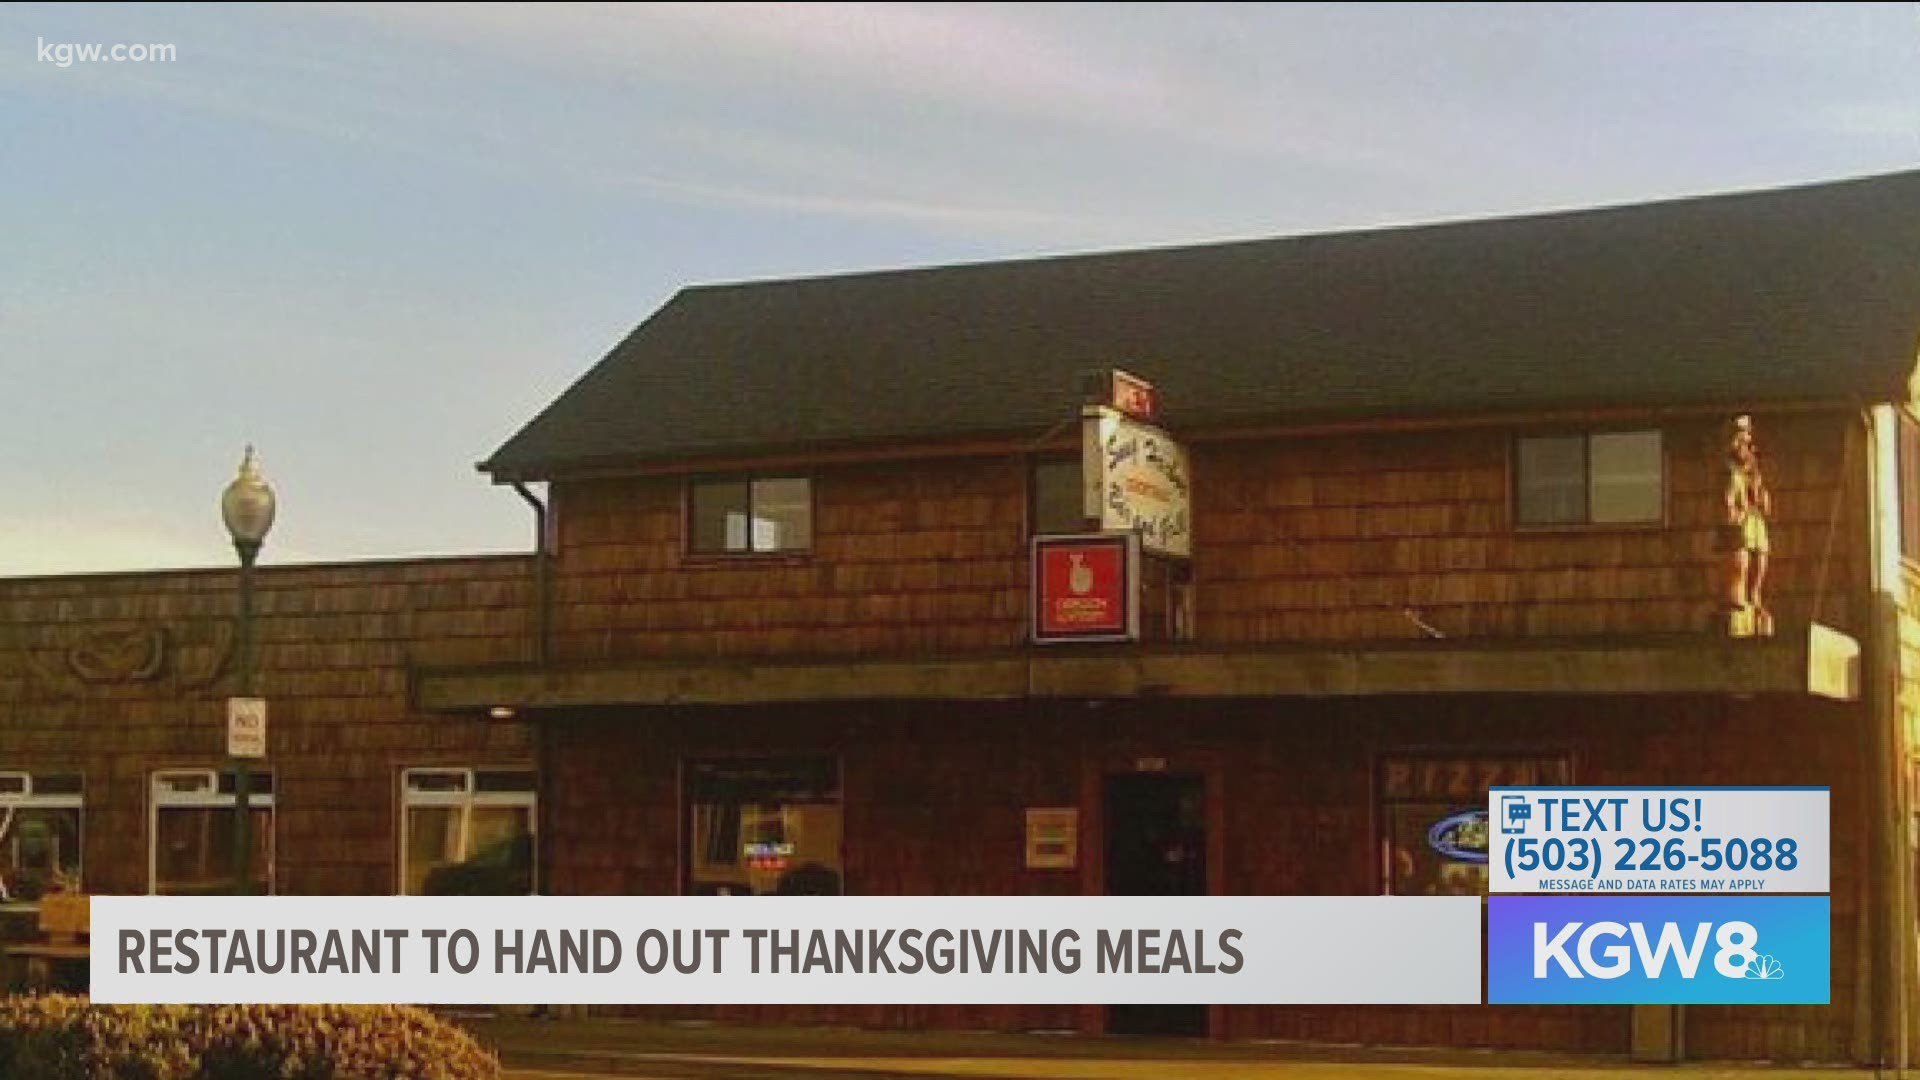 Snug Harbor Bar & Grill hands out free turkey dinners on Thanksgiving.